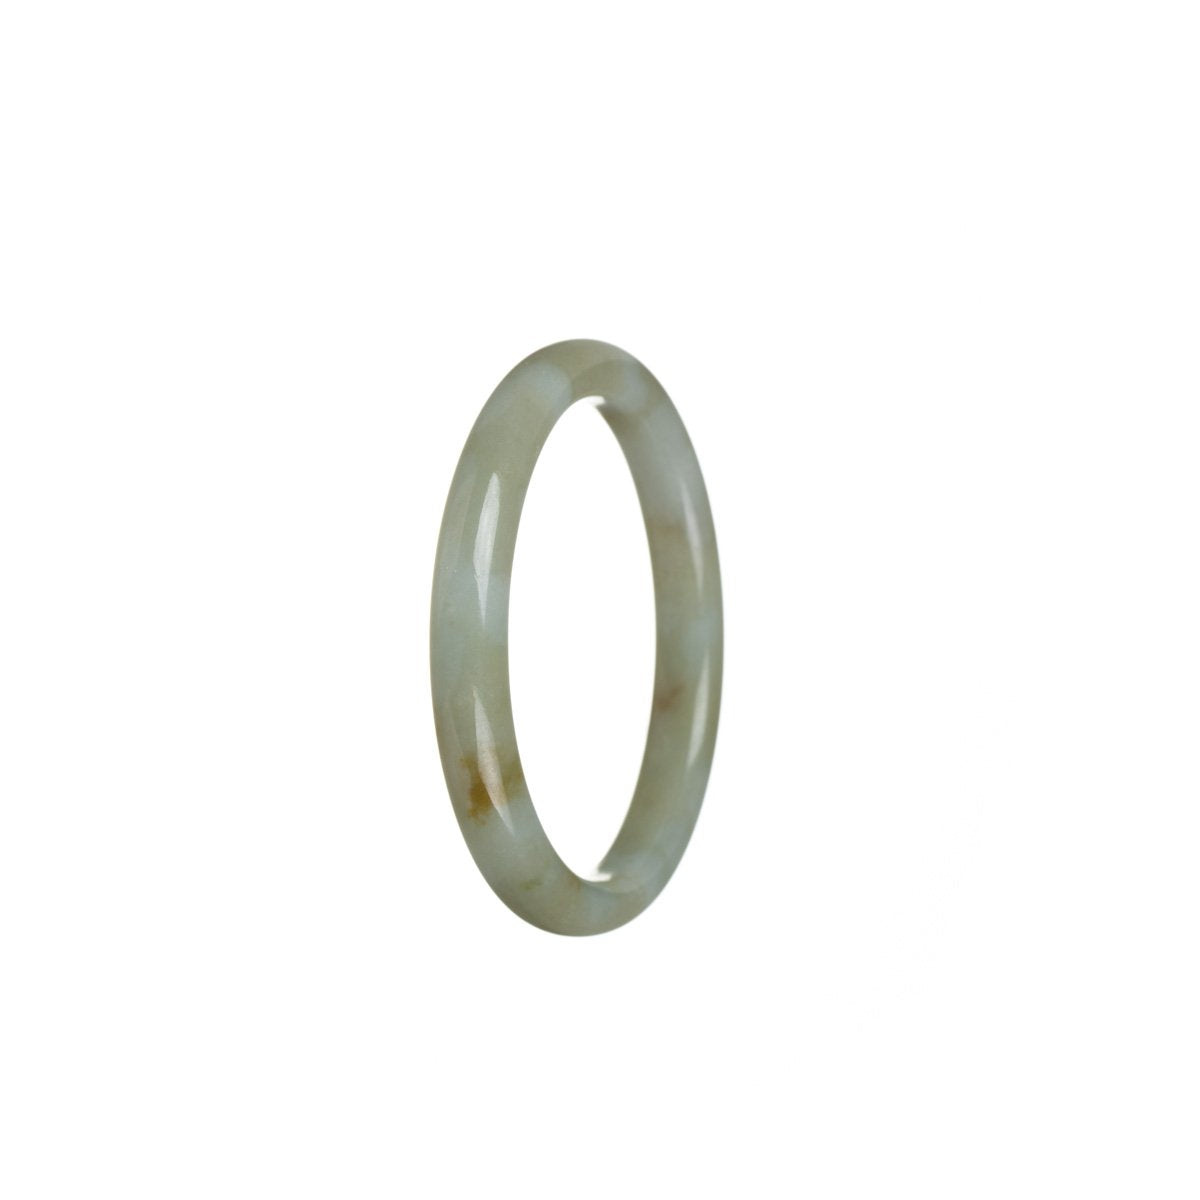 A small green jade bangle bracelet for children, certified Grade A and made in a traditional style.